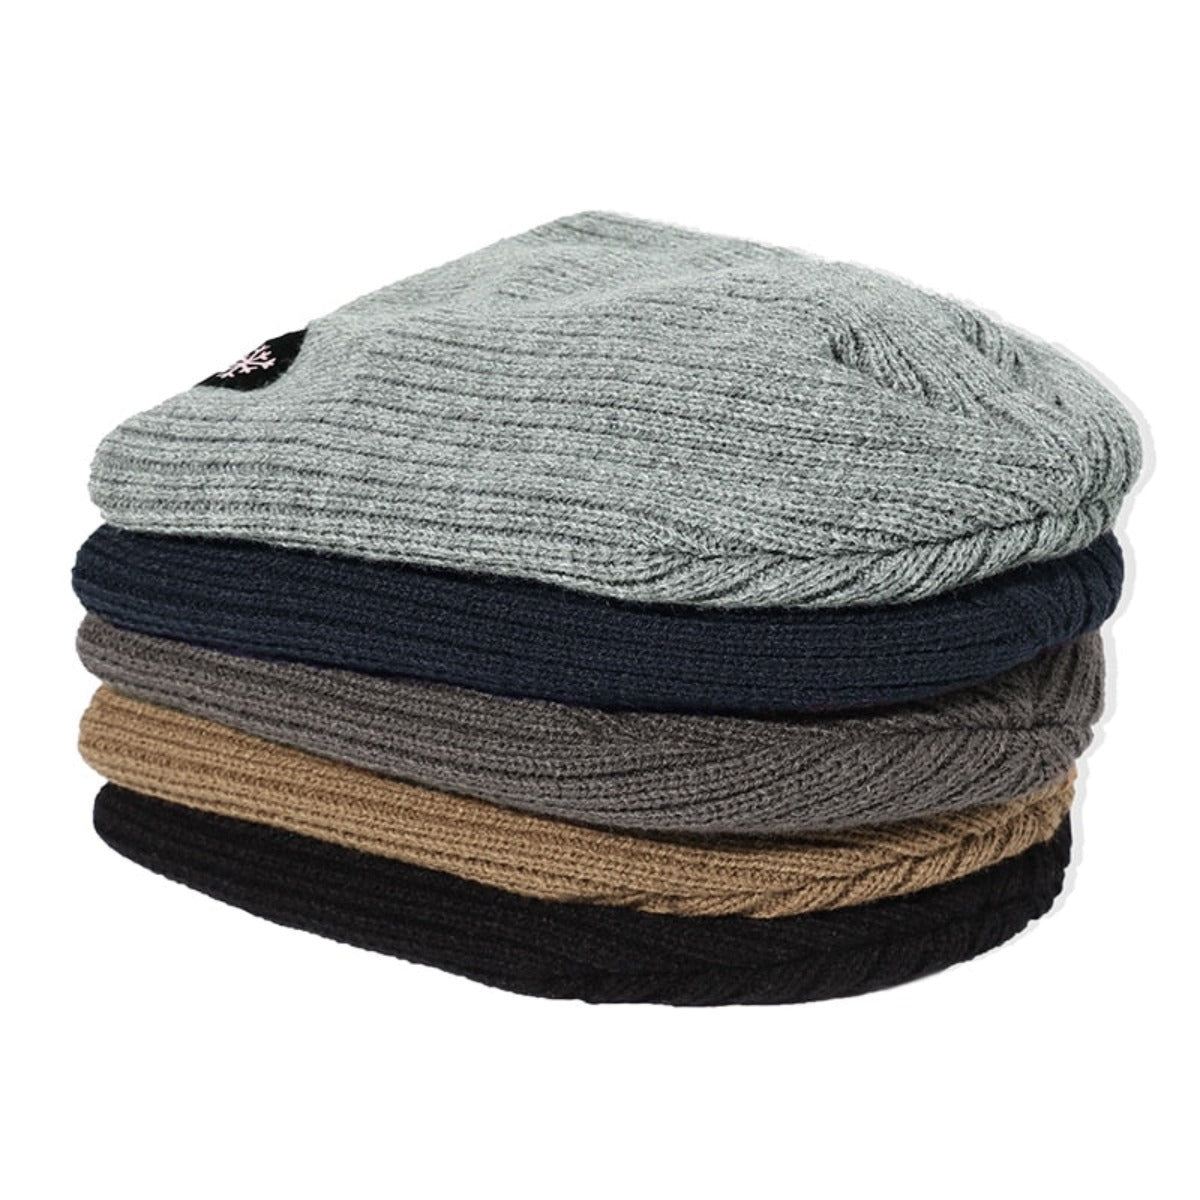 Four soft and warm Knitted Winter Beanie Hats stacked on top of each other.